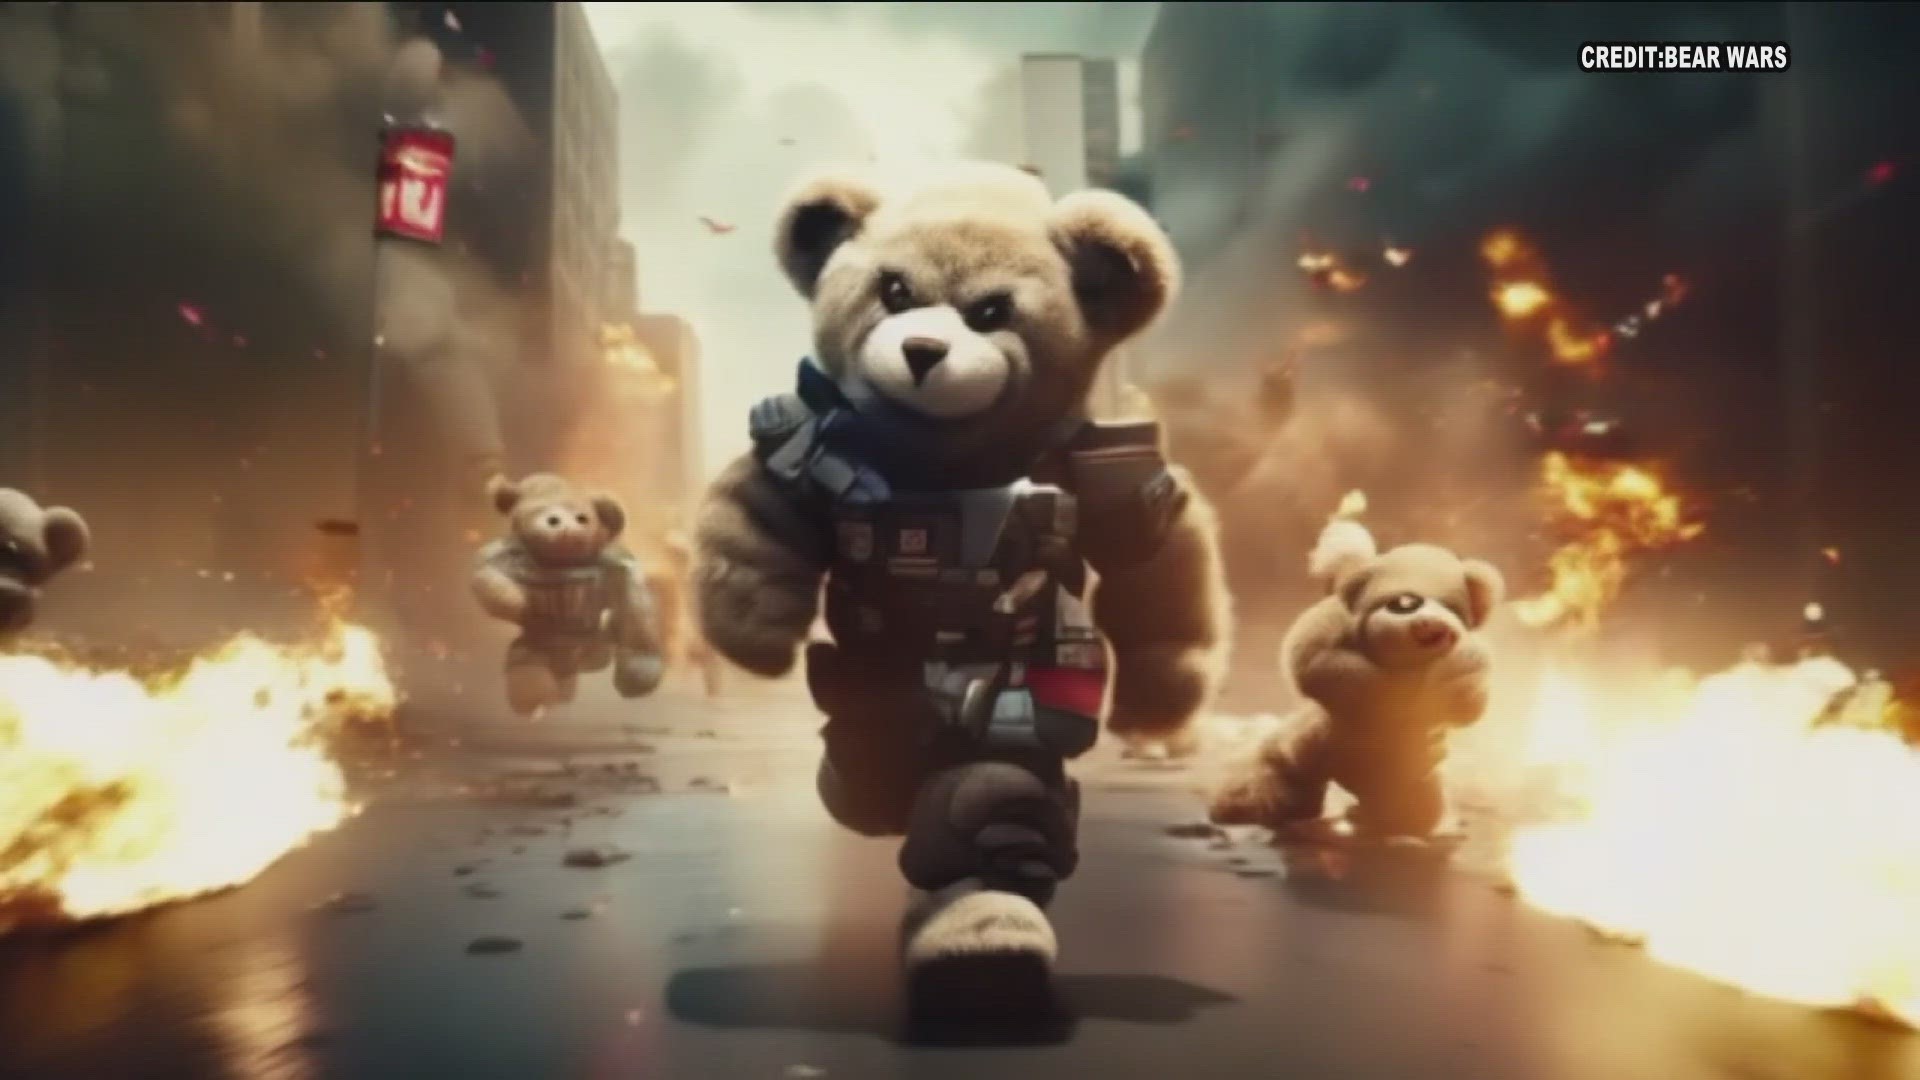 "Bear Wars" is an animated series about AI teddy bears fighting a war in the future.